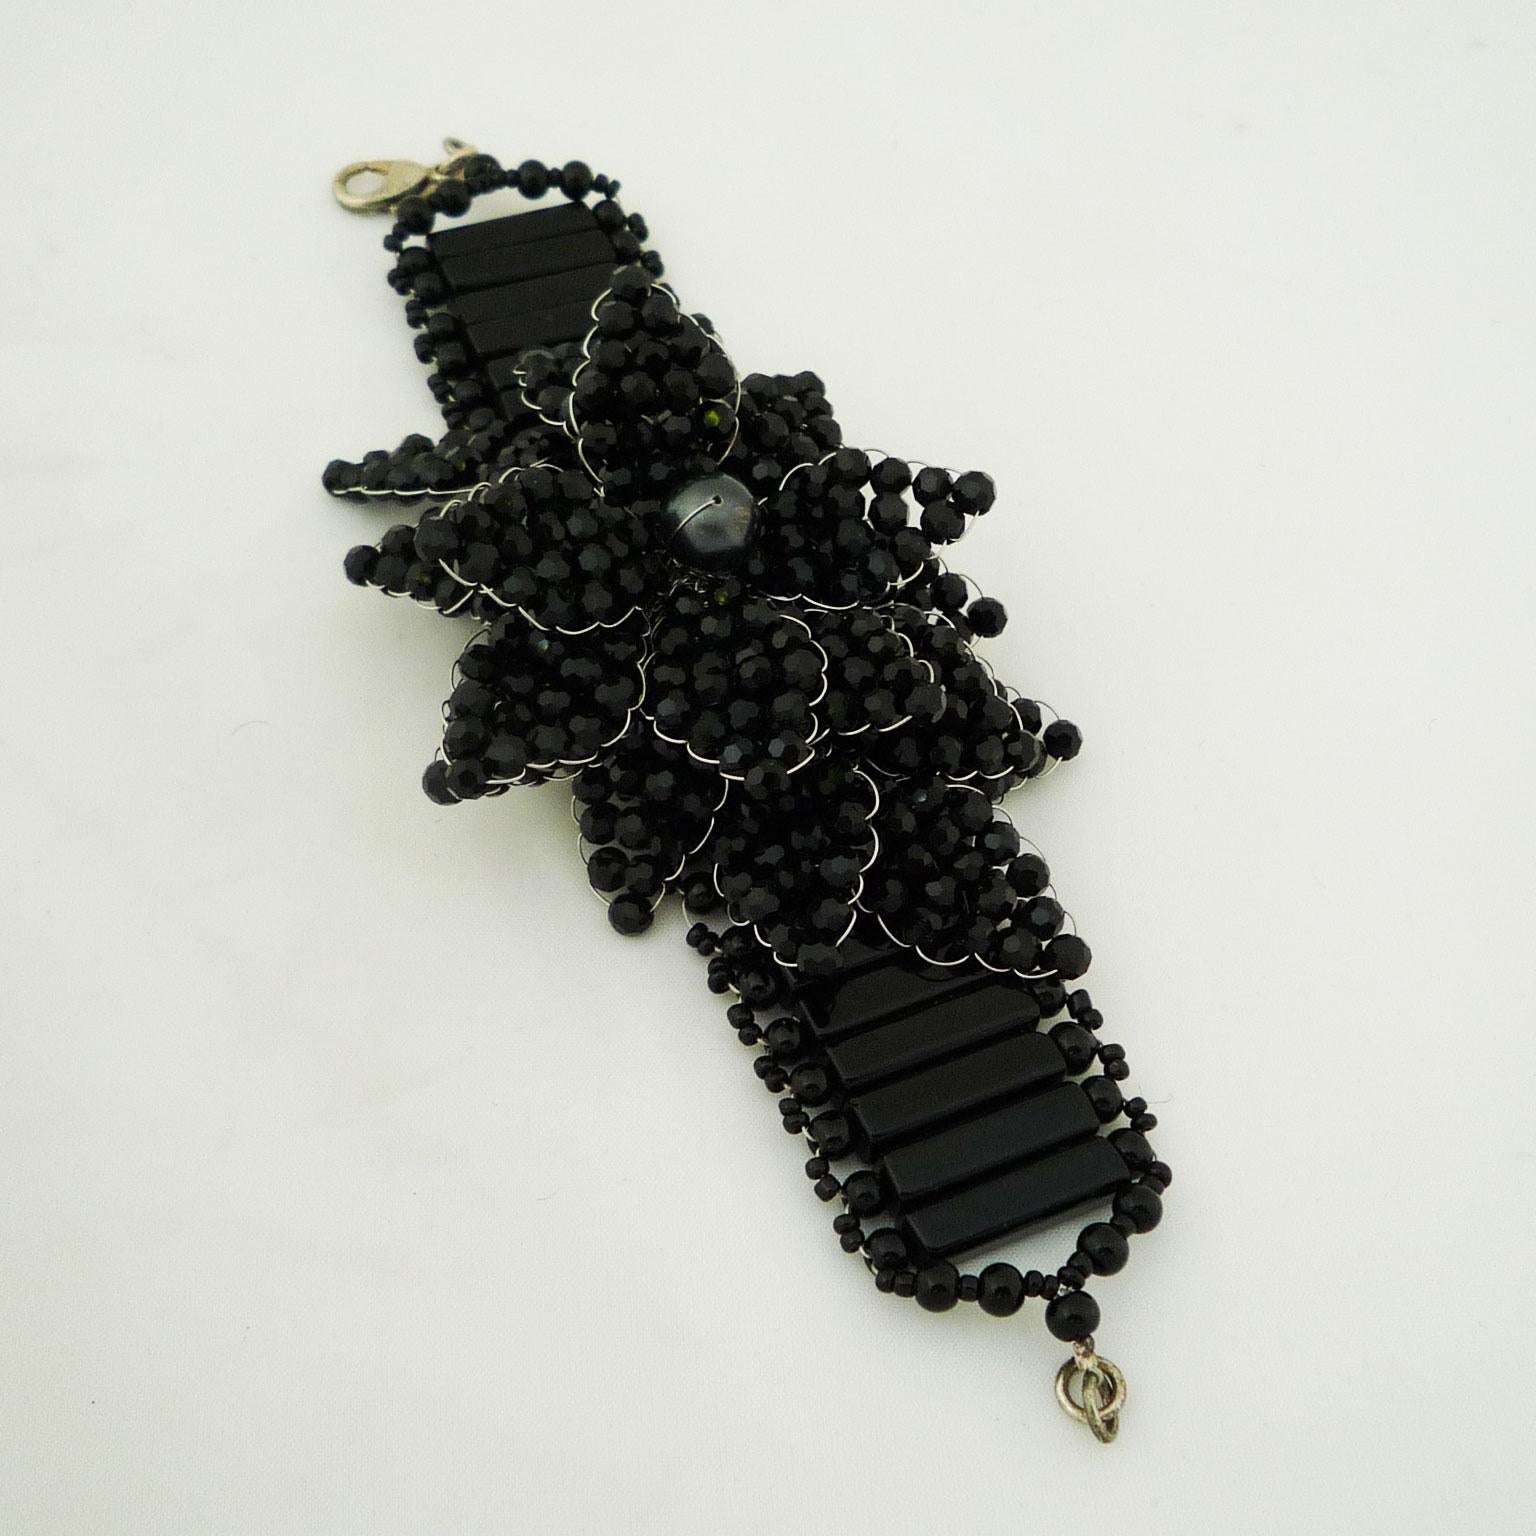 Bracelet made of black limestone and black Swarovski pearls
Handmade bracelet made of black limestone. On the bracelet a flower was artfully tied up. The color of pure, unadulterated limestone is white and gets a dark gray to black color due to the